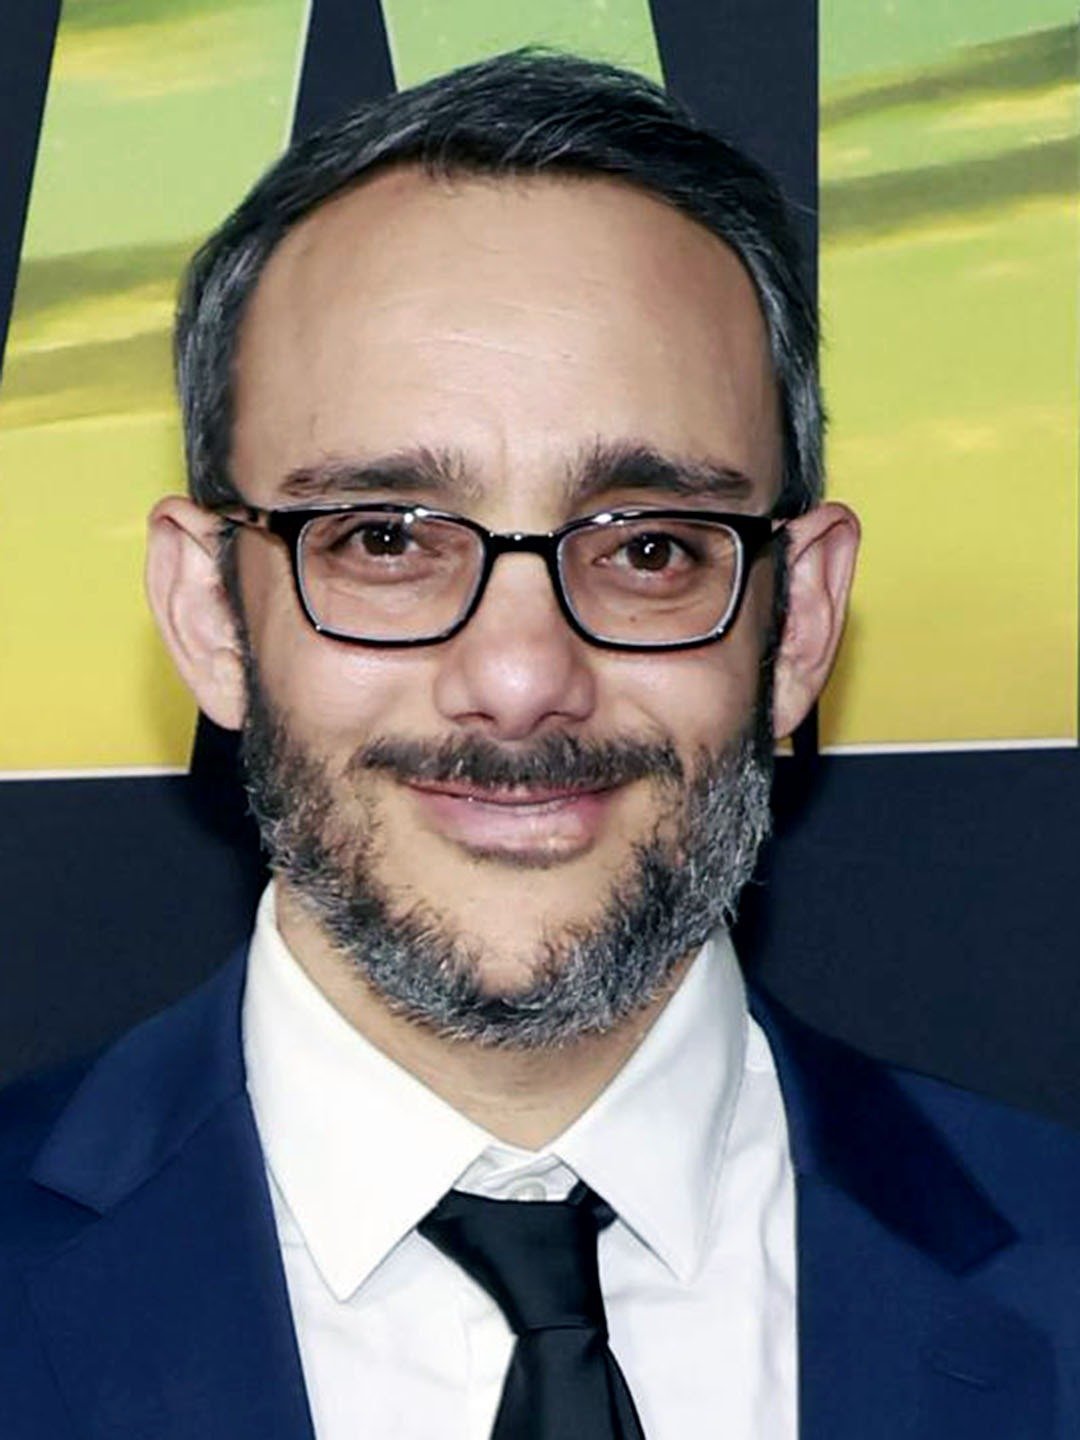 The 44-year old son of father (?) and mother(?) Omid Abtahi in 2023 photo. Omid Abtahi earned a  million dollar salary - leaving the net worth at  million in 2023